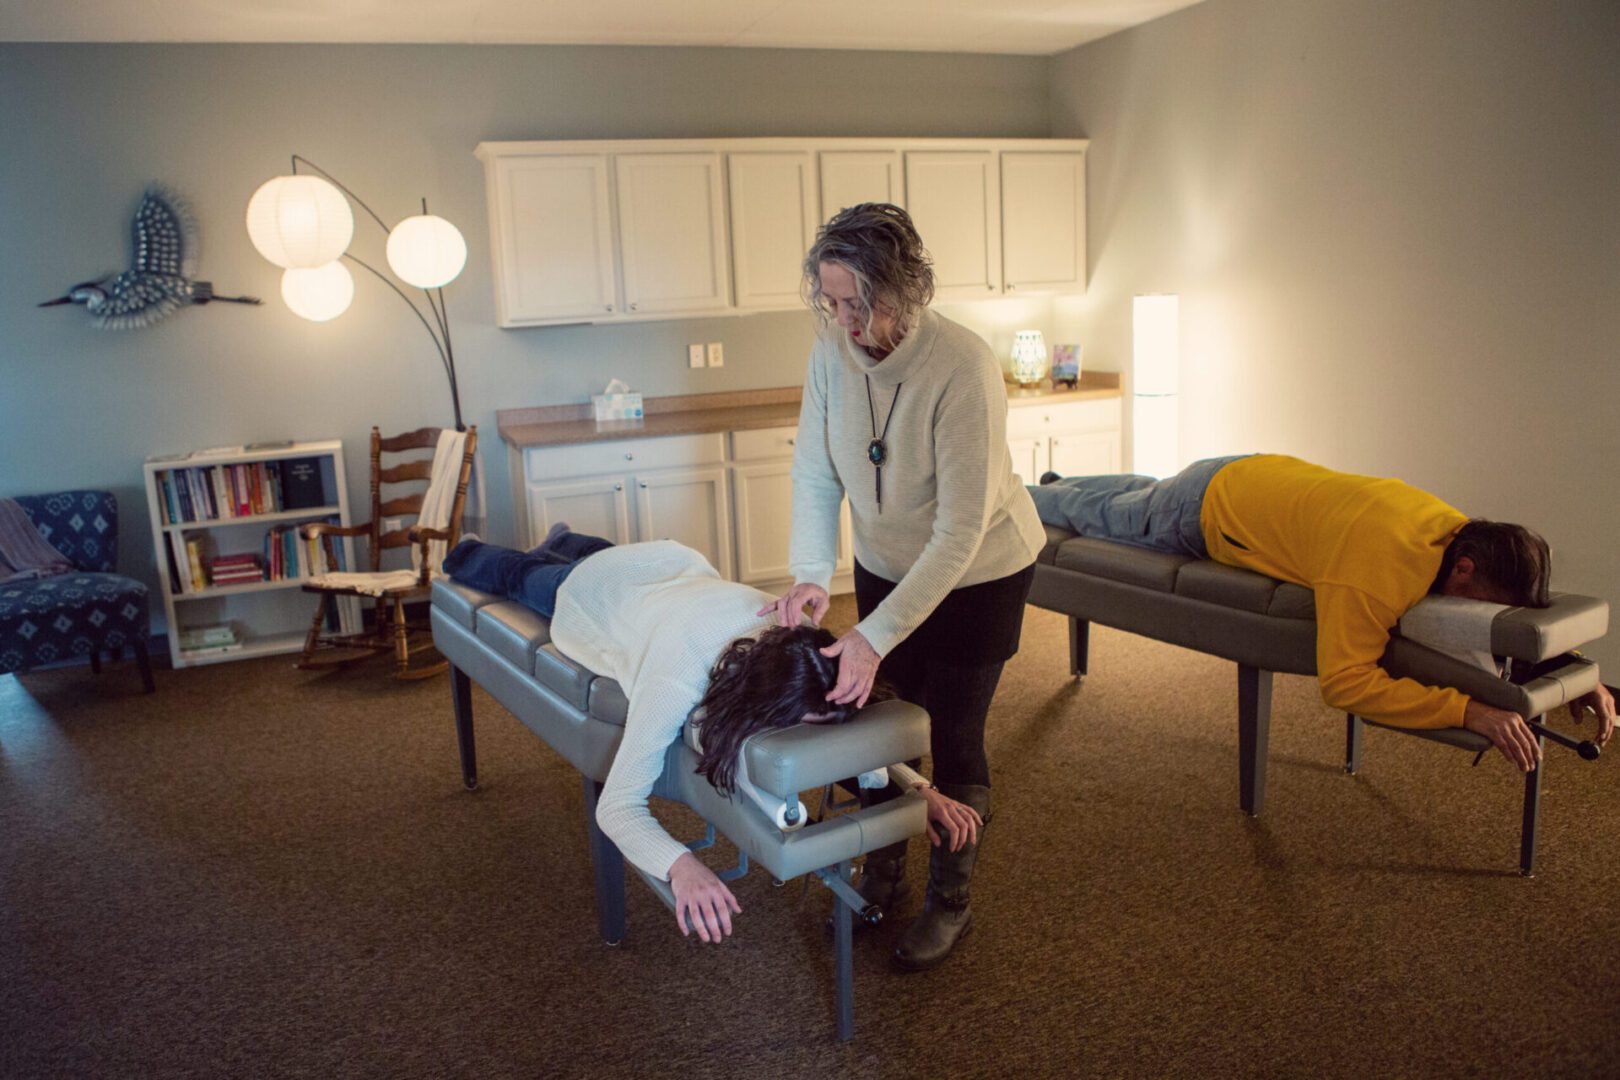 A woman is getting her back examined by an osteopath.